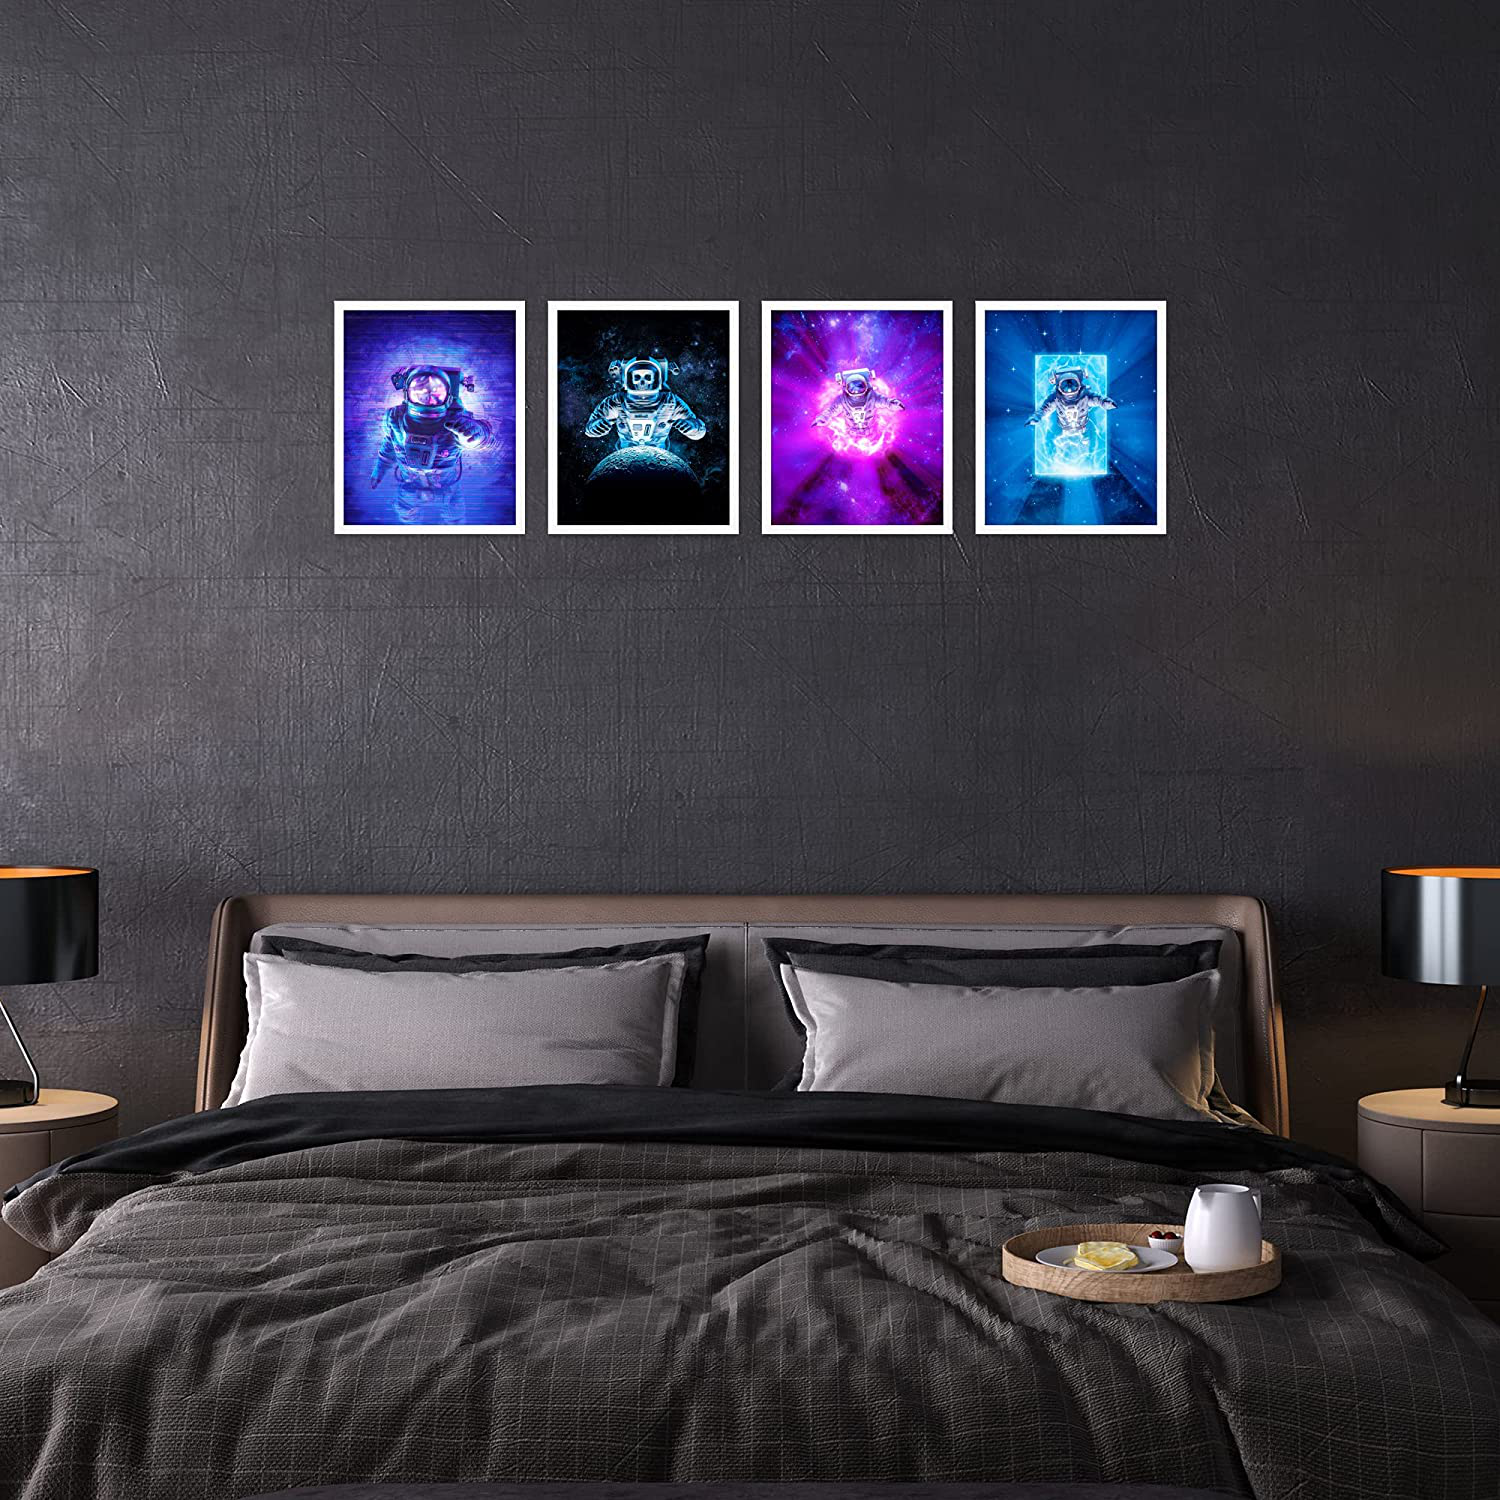 Space Wall Decor - Space Poster, Set of 4 Space Wall Art Prints - Space Posters for Walls - Astronaut Wall Art, UNFRAMED, (8x10") - Space Wall Decor Kids, Kids Space Wall Art, Galaxy Art - Bright